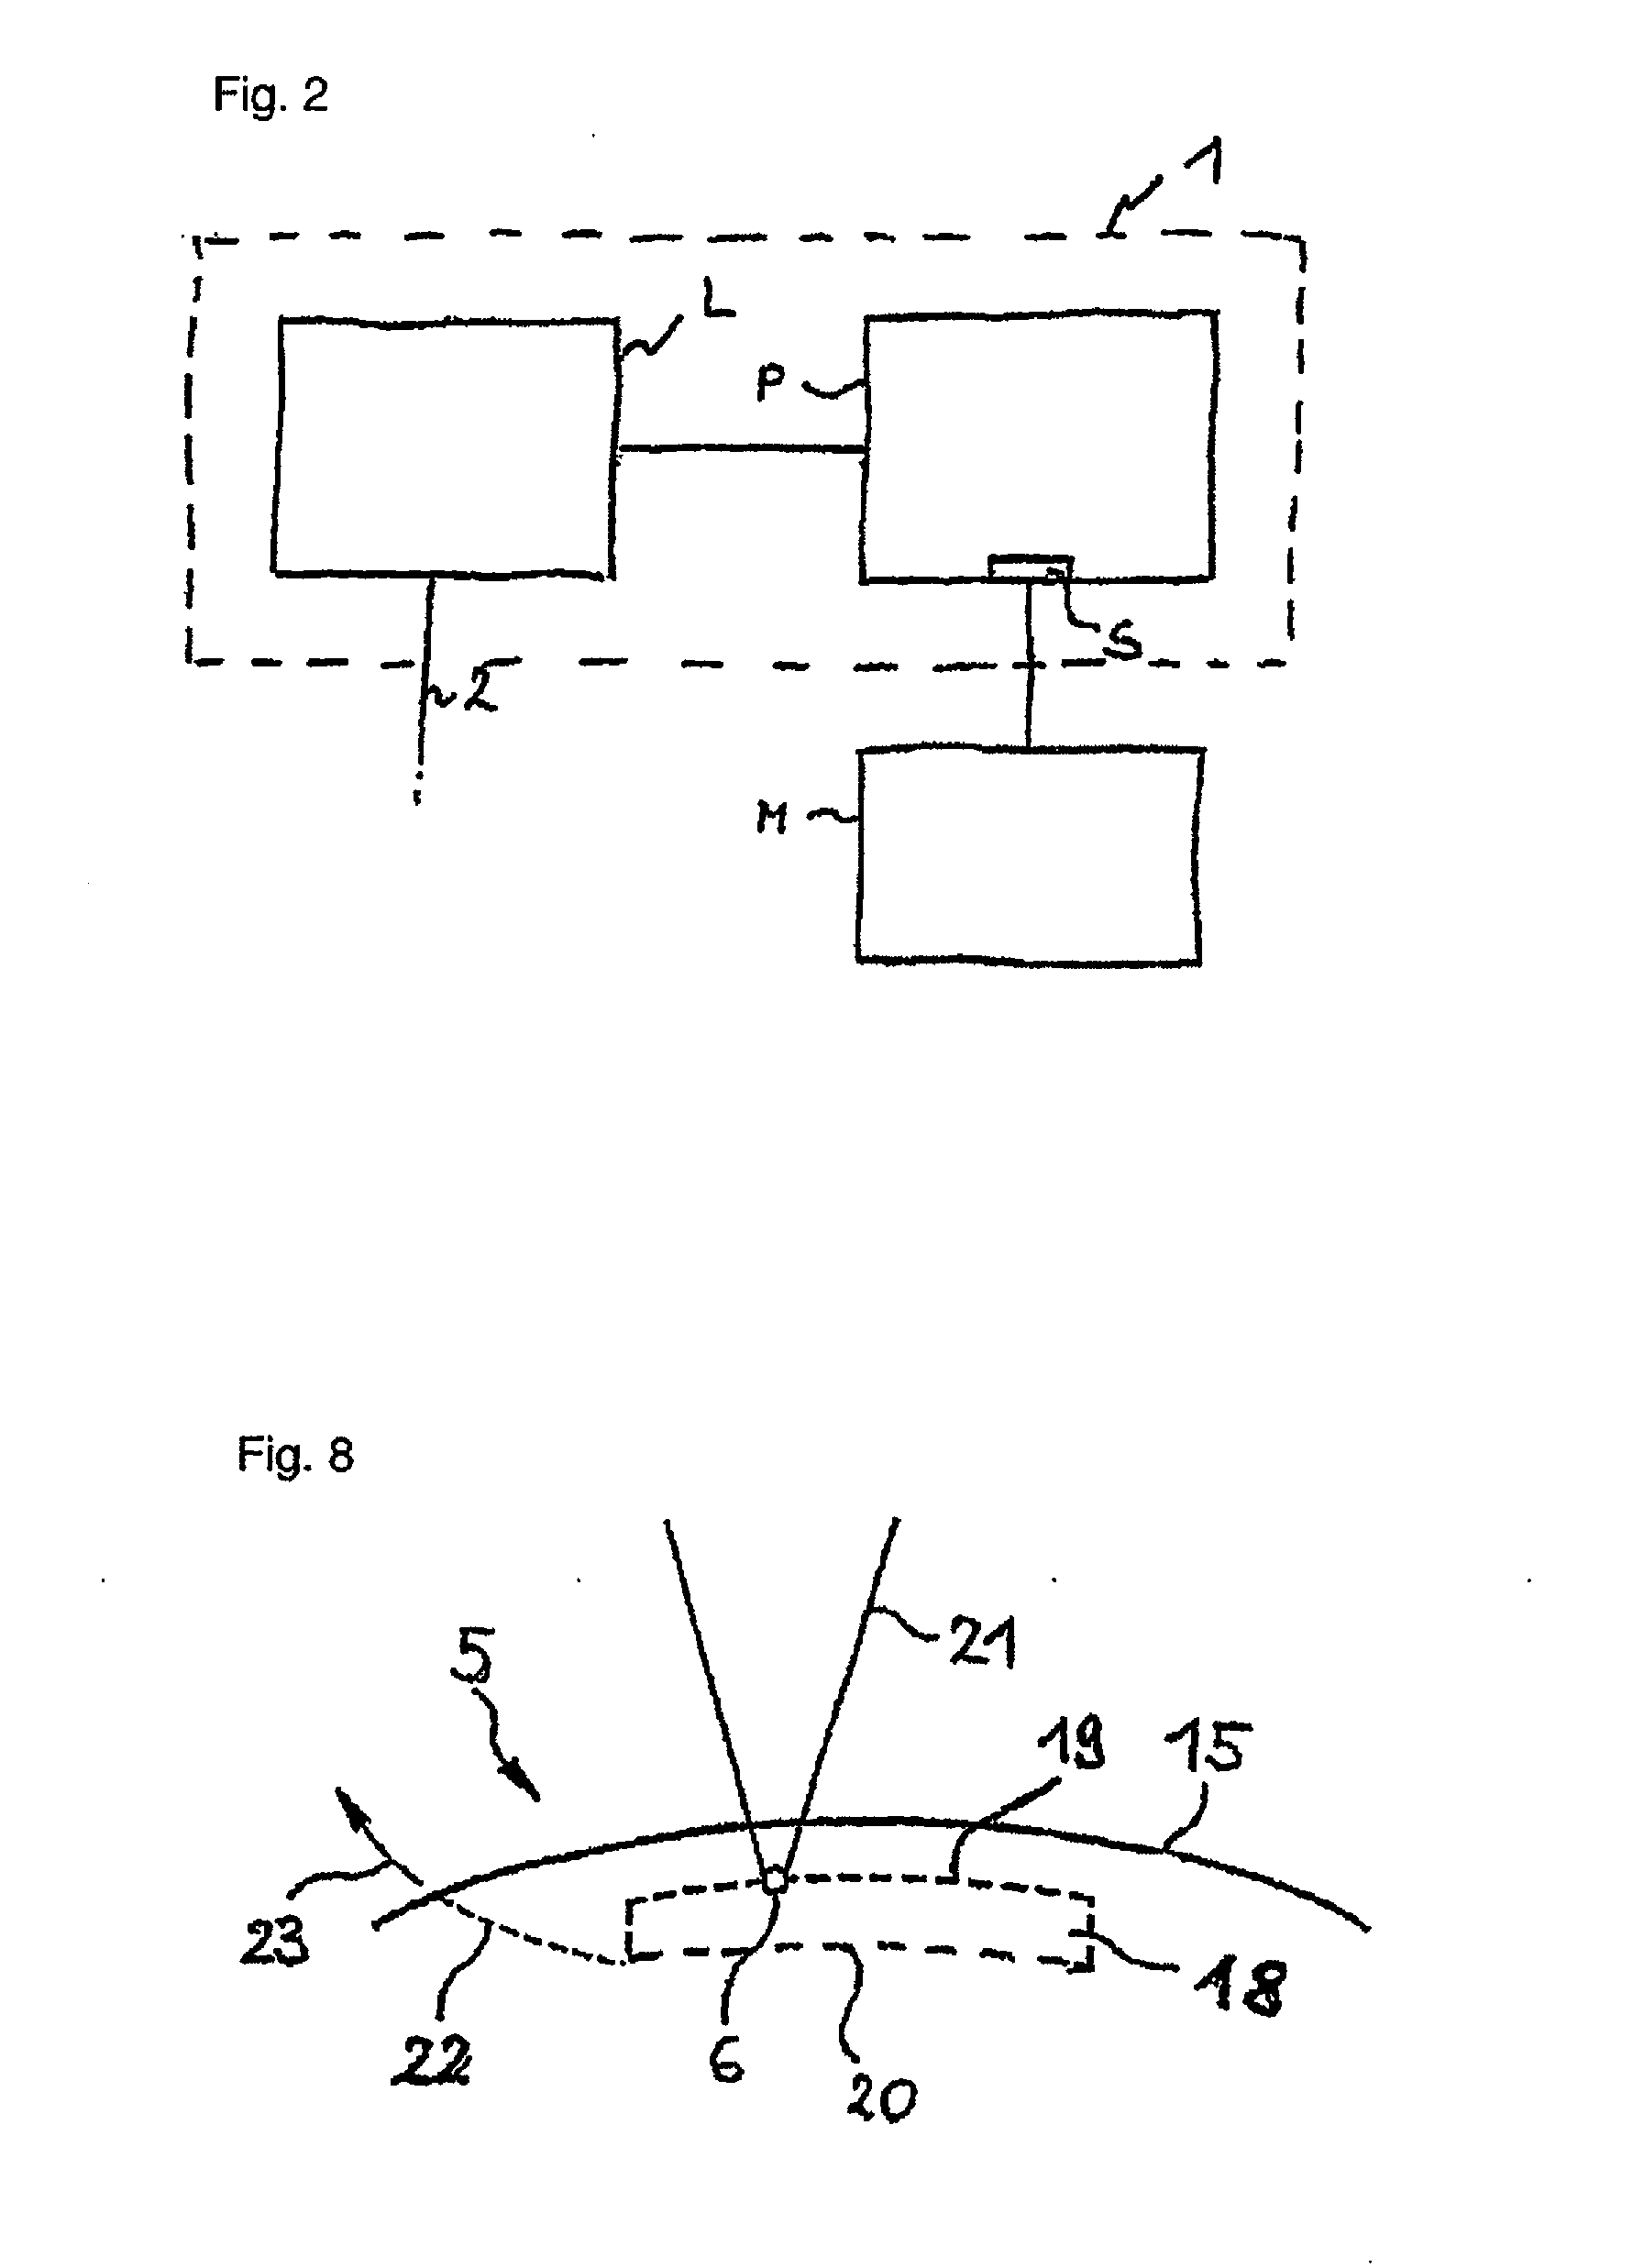 Treatment device for the surgical correction of defective vision of an eye, method for producing control data therefor, and method for the surgical correction of defective vision of an eye